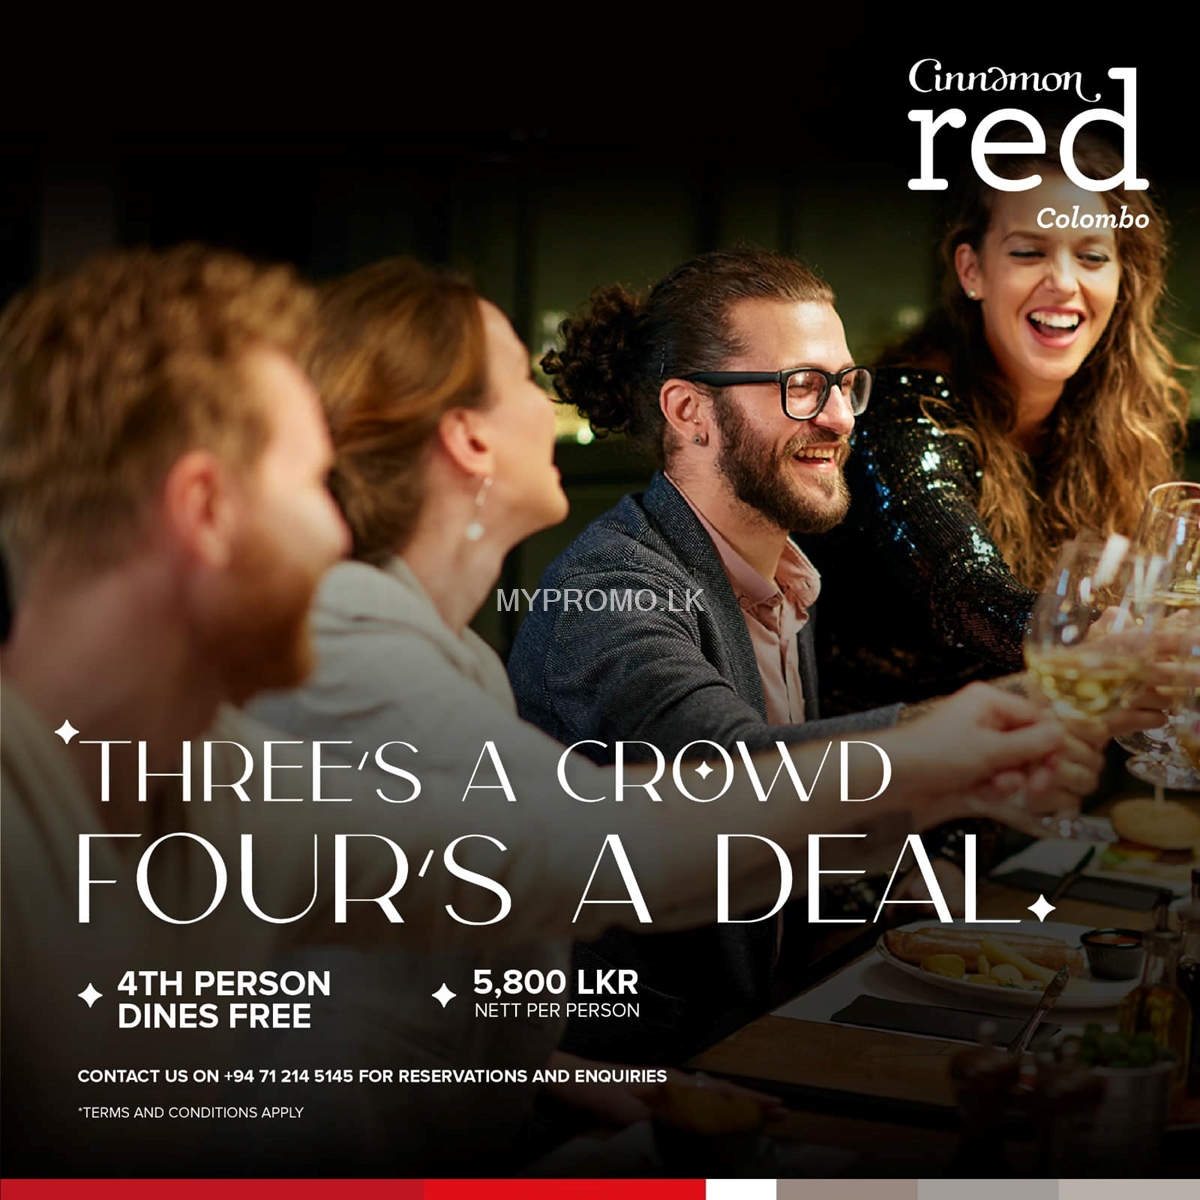 THREE’S A CROWD FOUR’S A DEAL at Cinnamon Red